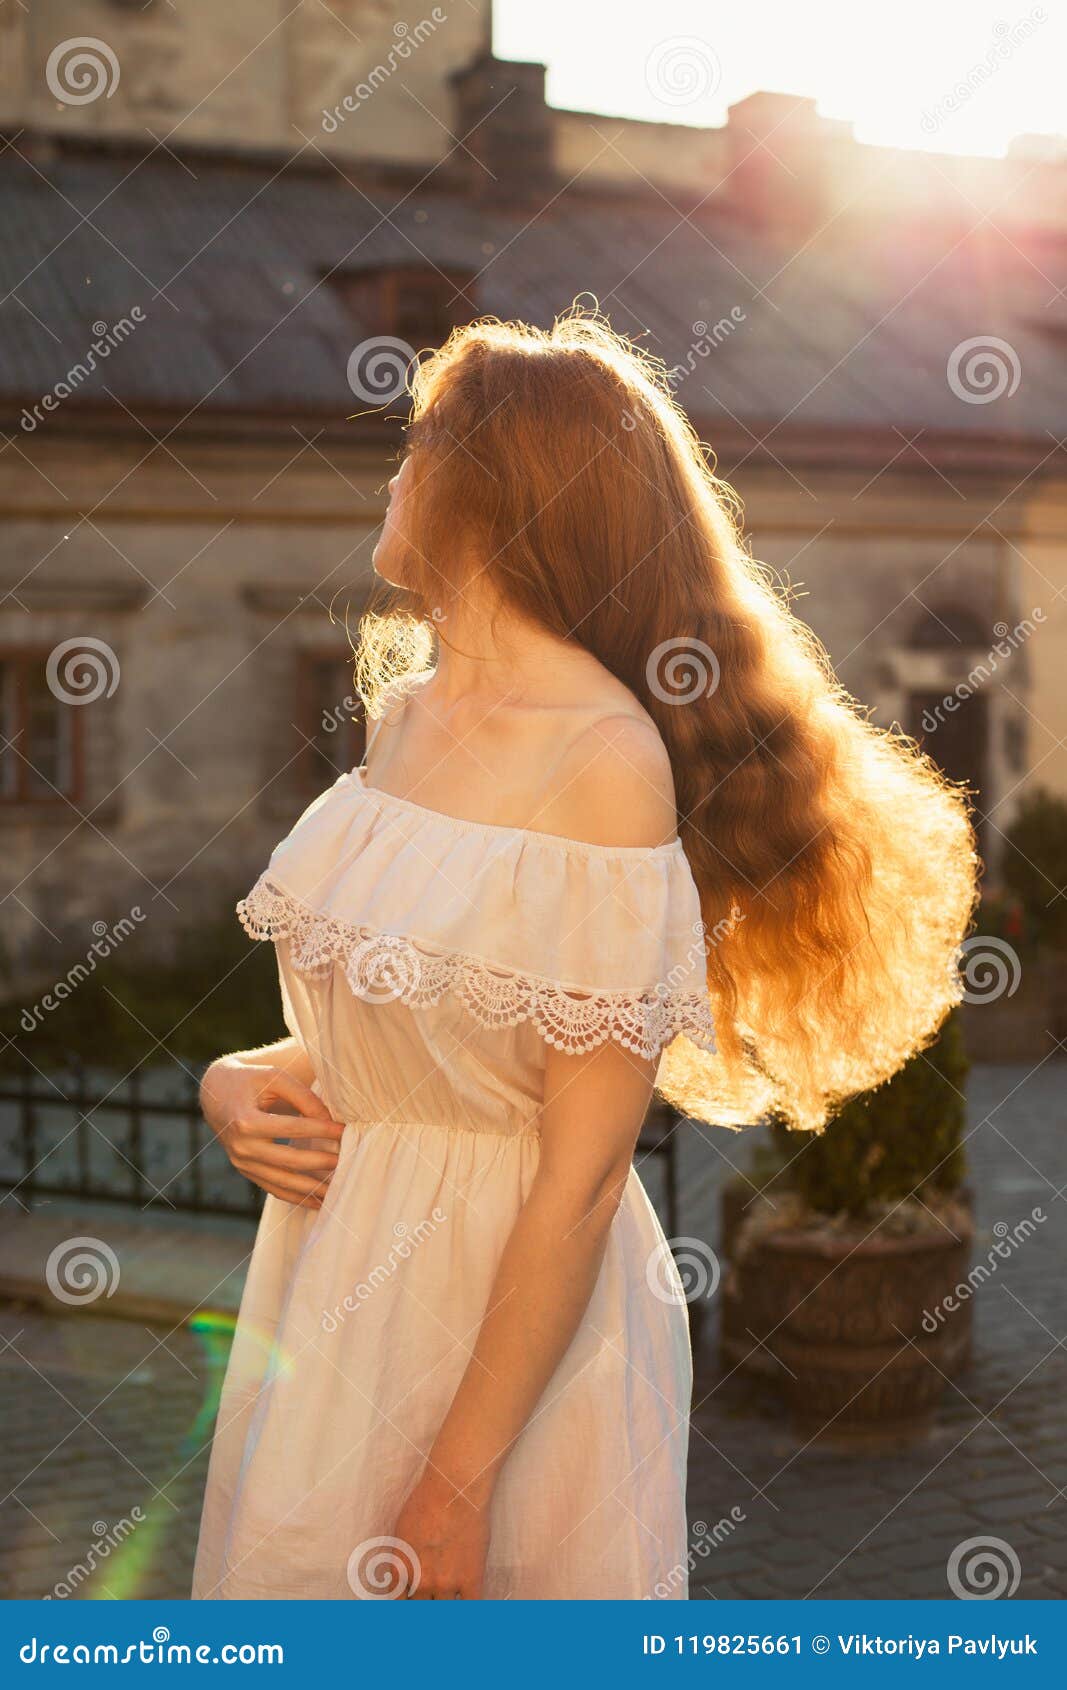 Pretty Redhead Girl With Long Lush Hair Posing With